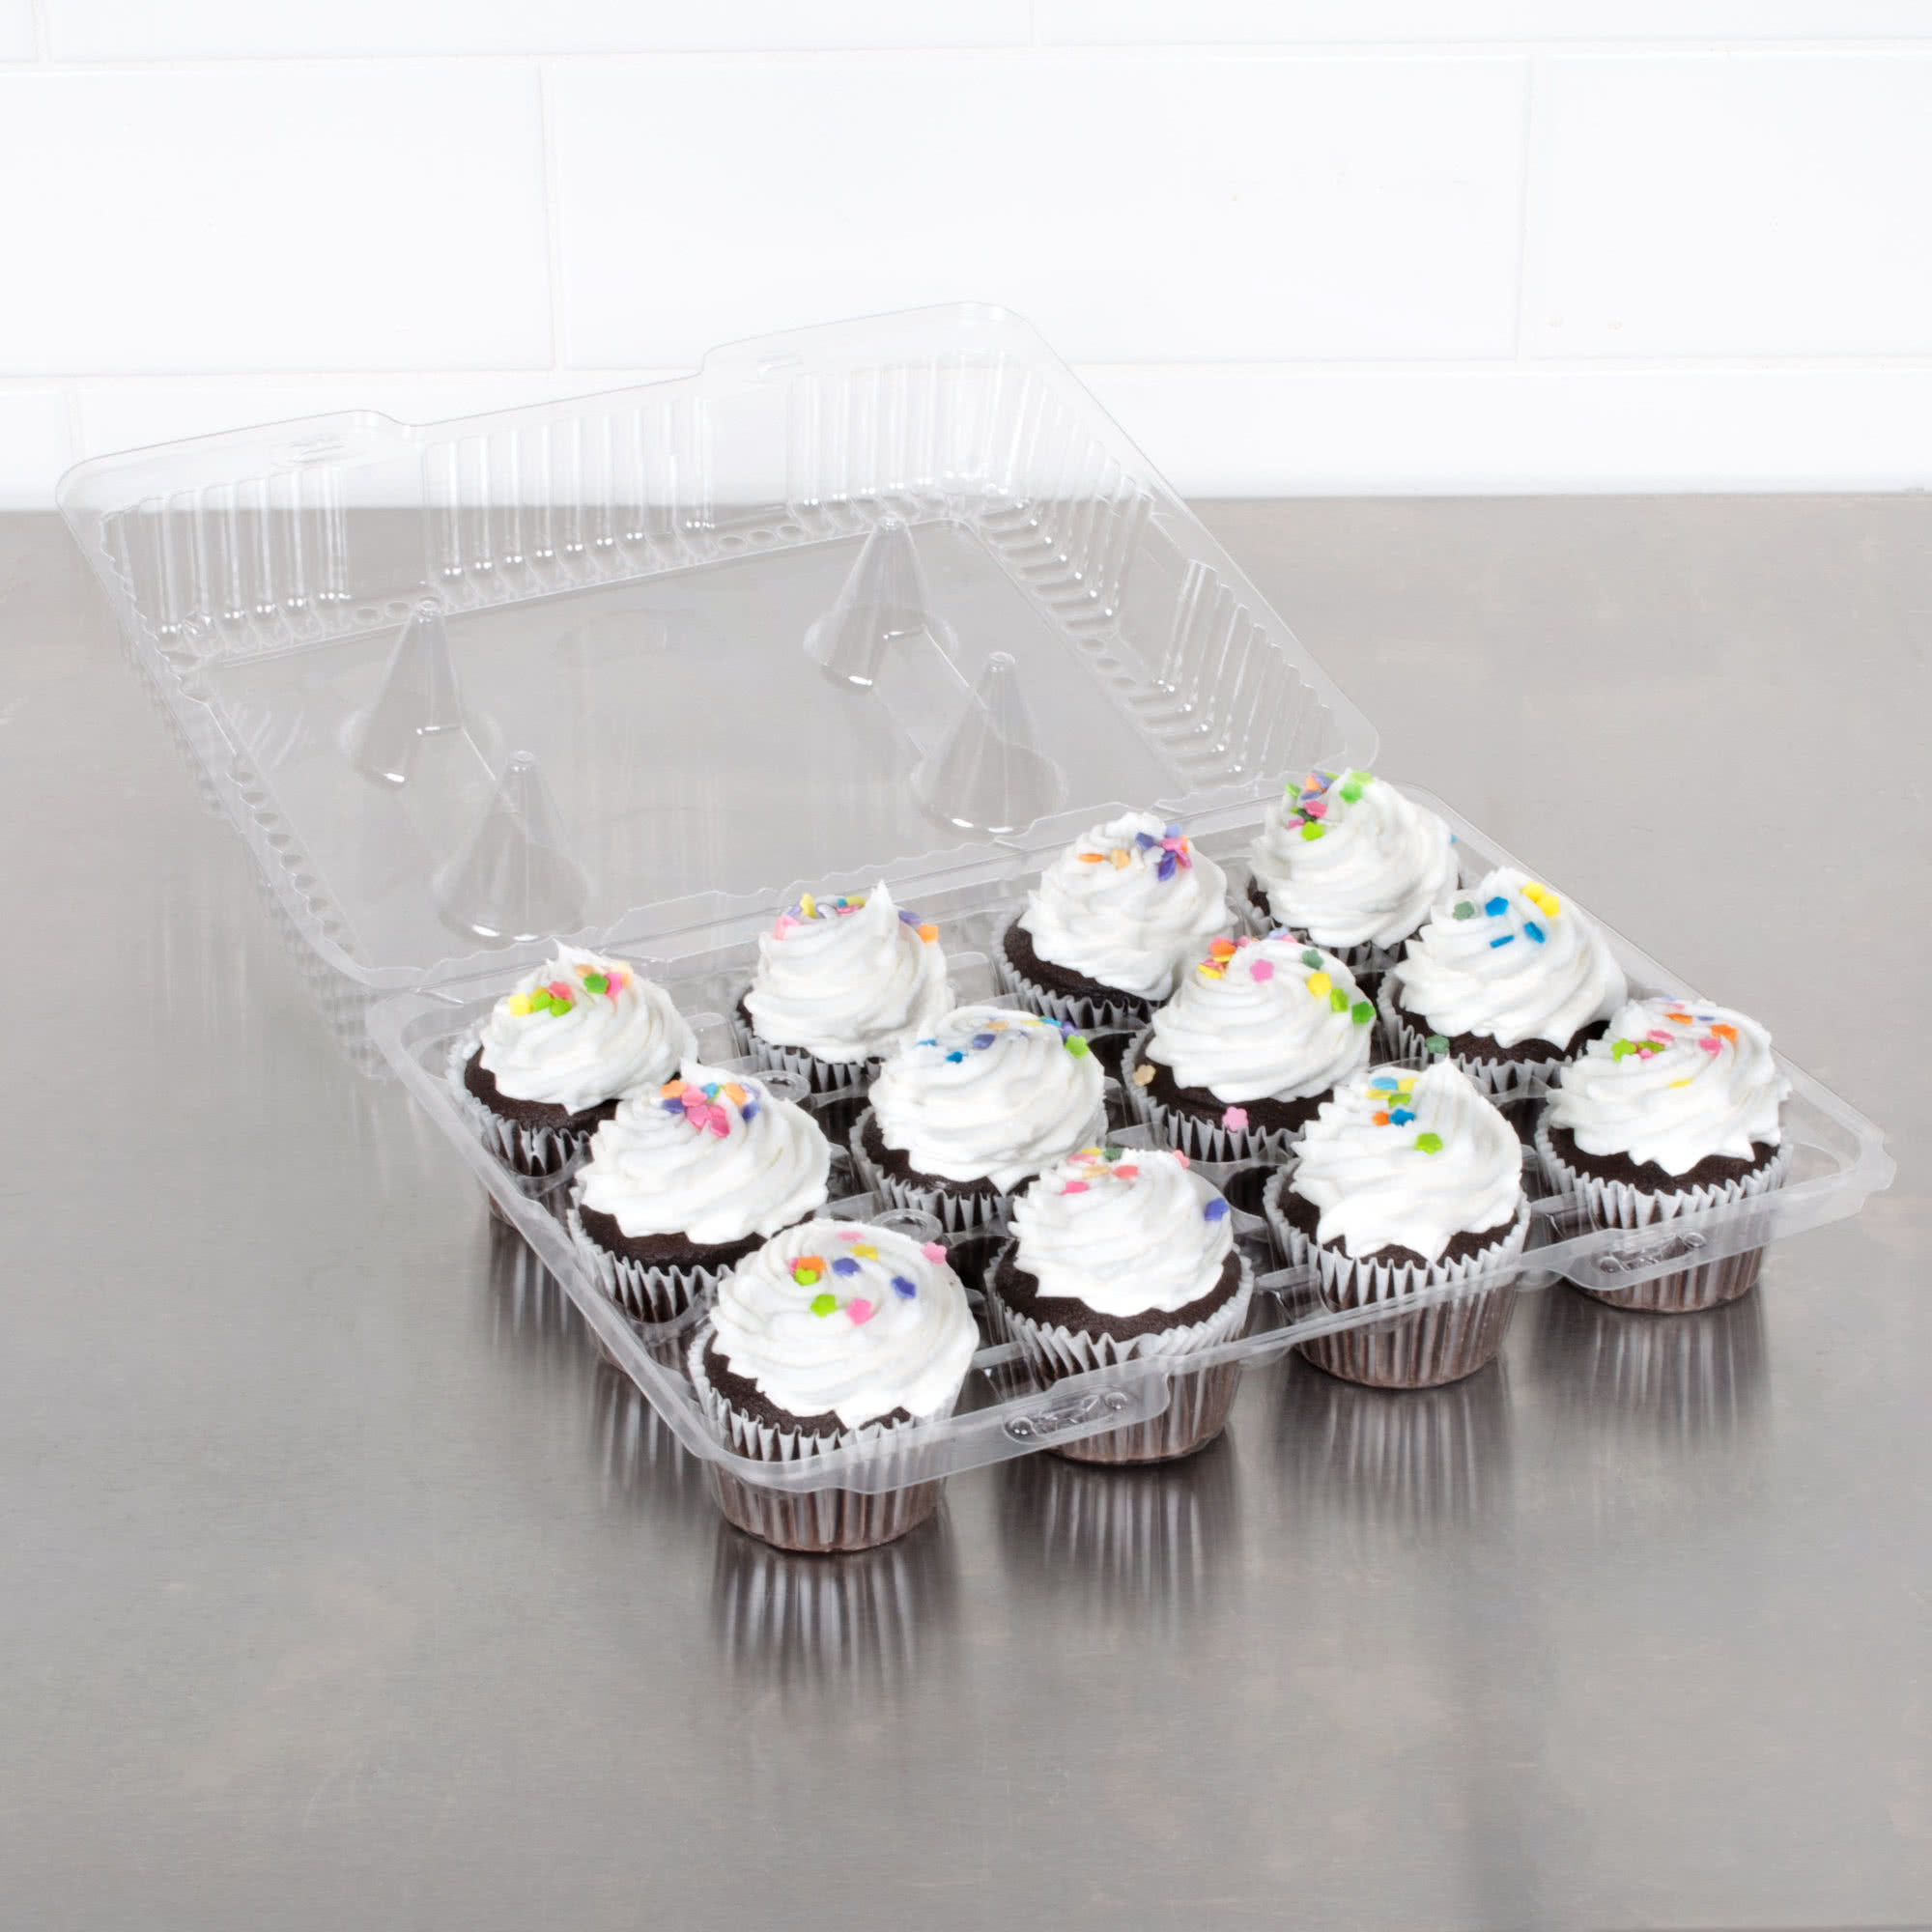 R3 CUPCAKE CONTAINERS 12COUNT
12-1/2x10-1/4x3-5/3,CLEAR,76/
CS